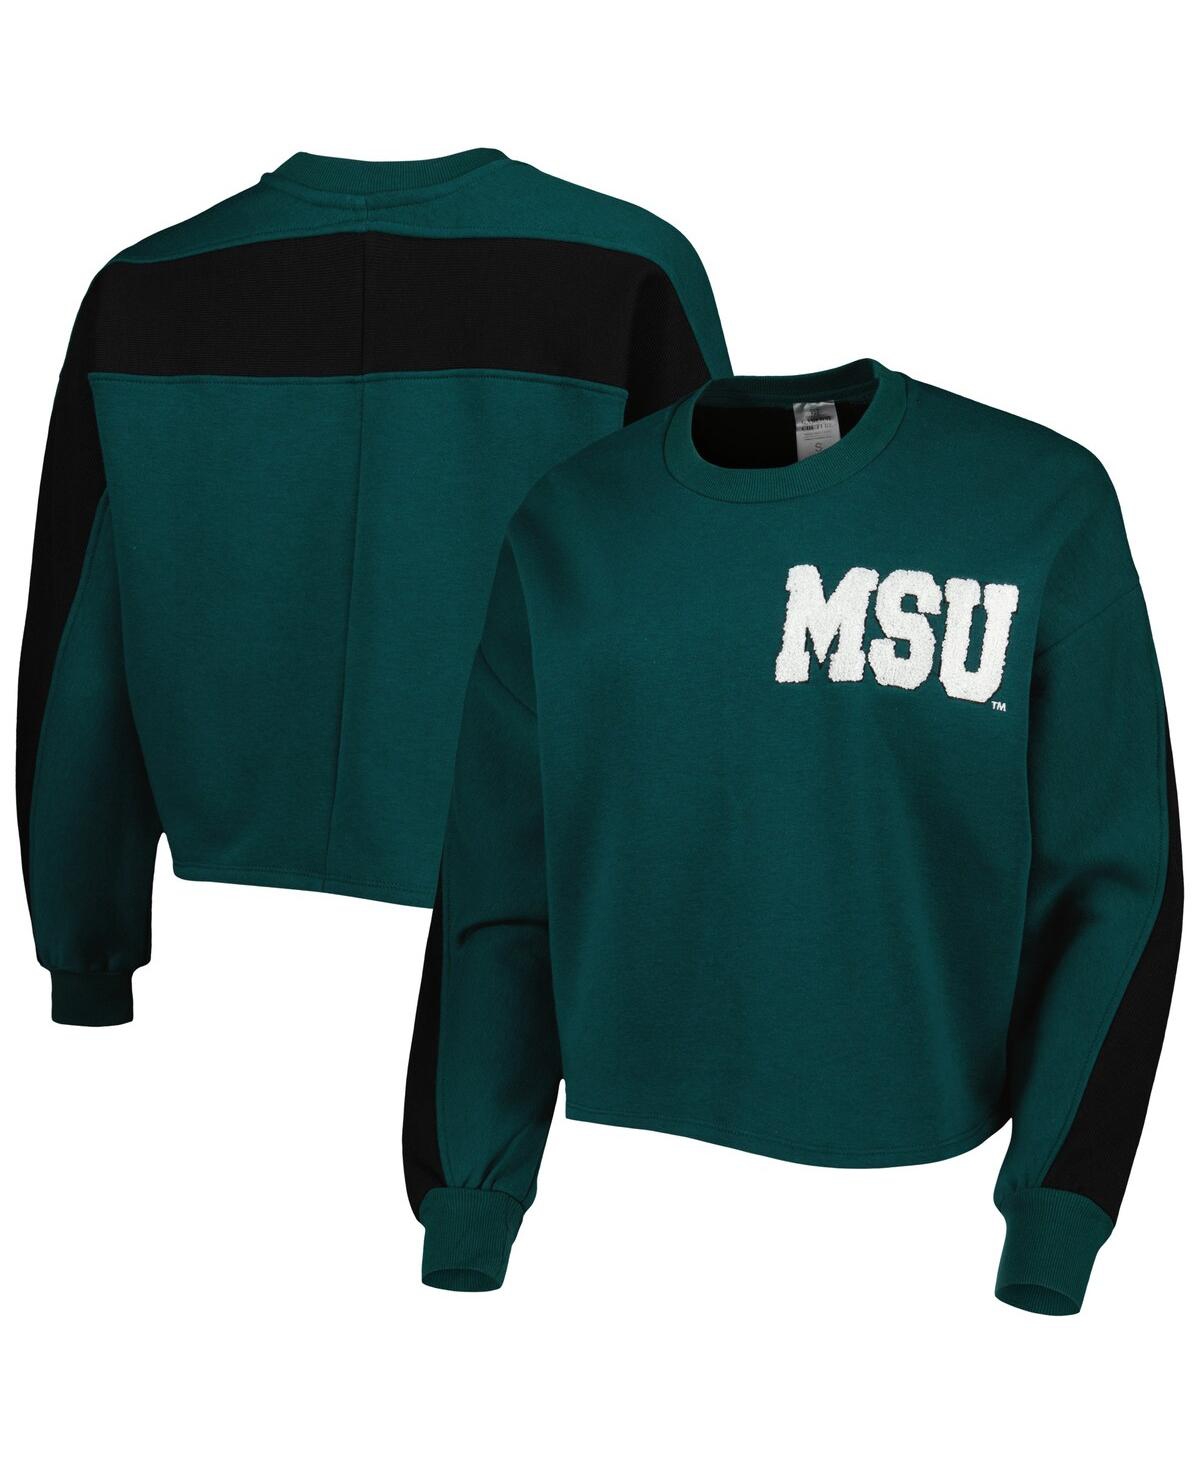 Gameday Couture Women's  Green Michigan State Spartans Back To Reality Colorblock Pullover Sweatshirt